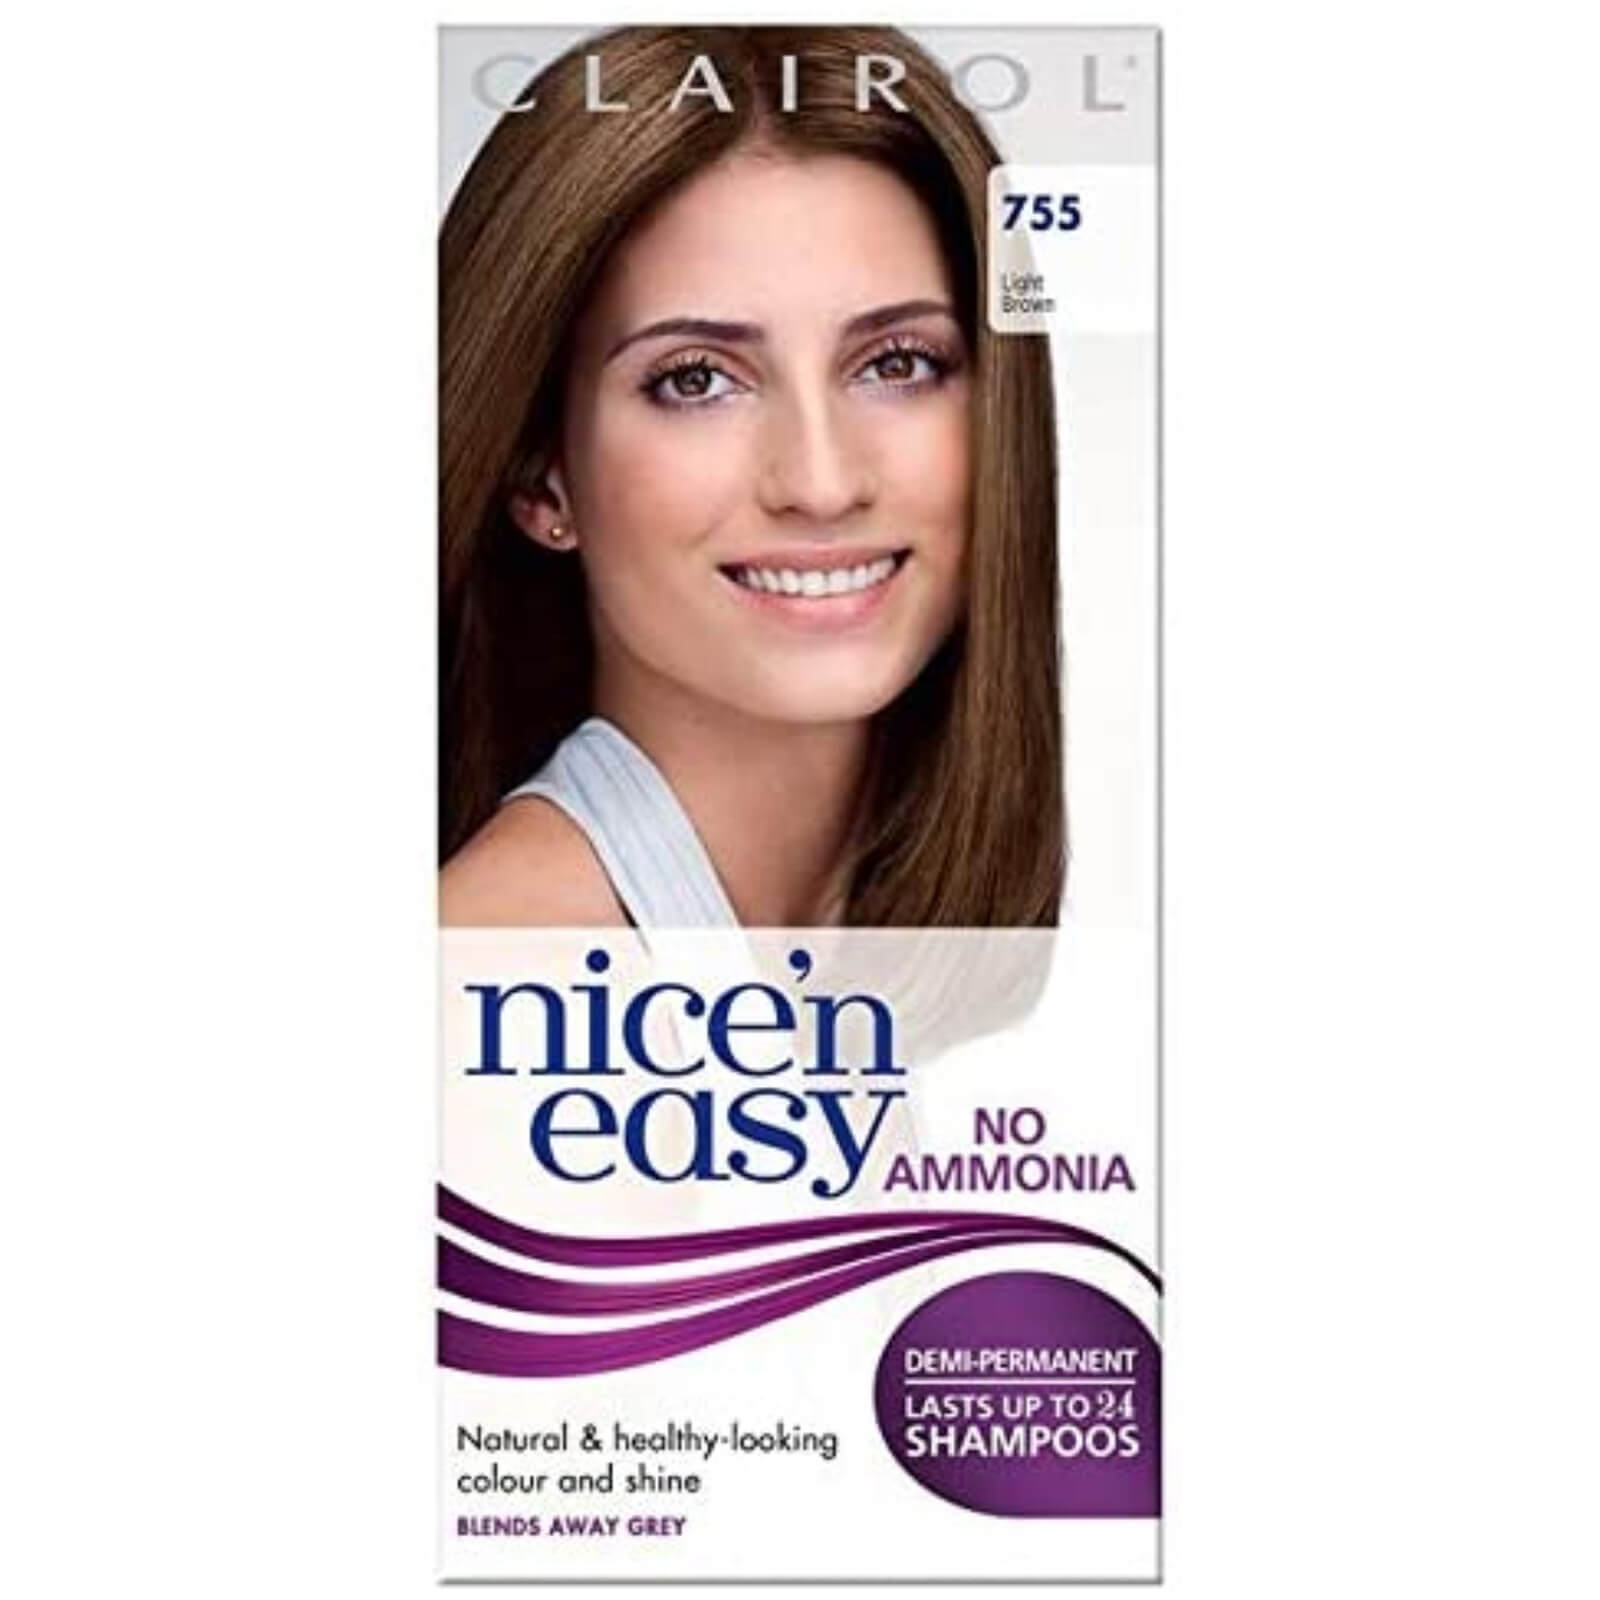 Clairol Nice'n Easy Semi-Permanent Hair Dye with No Ammonia (Various Shades) - 755 Light Brown